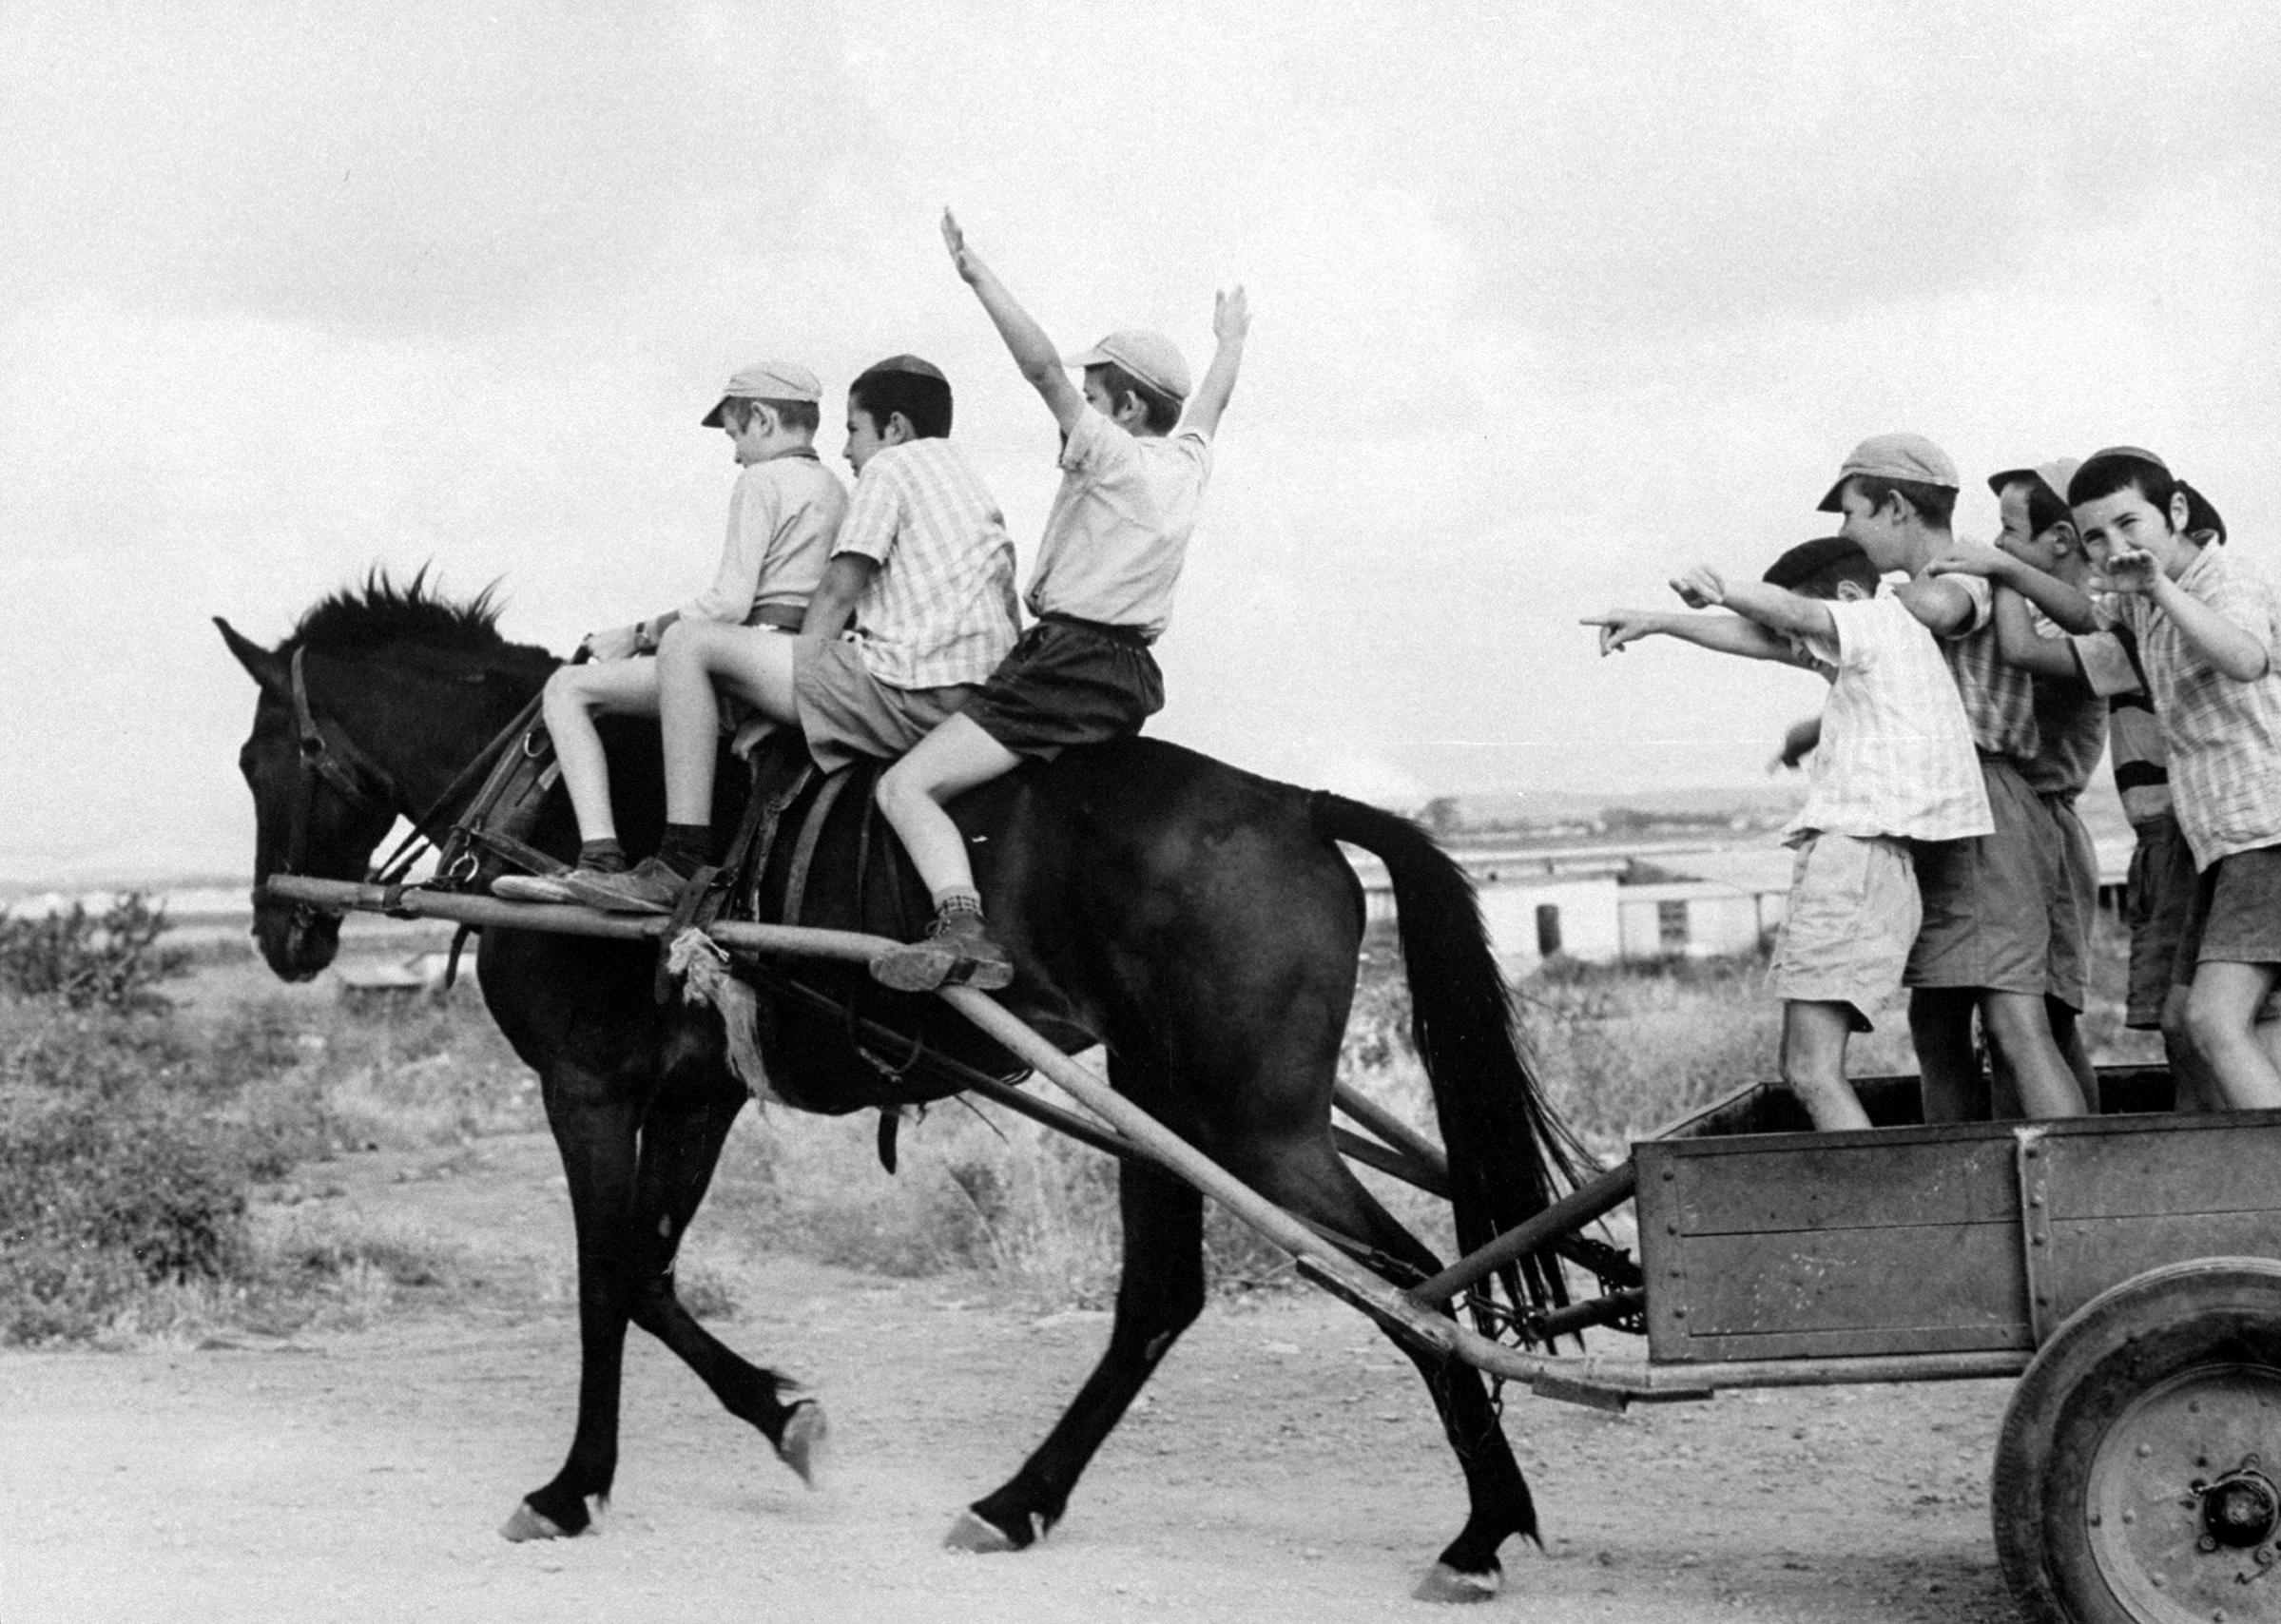 Israeli children of Habad sect, frolic with horse and cart at farm village, 1960.